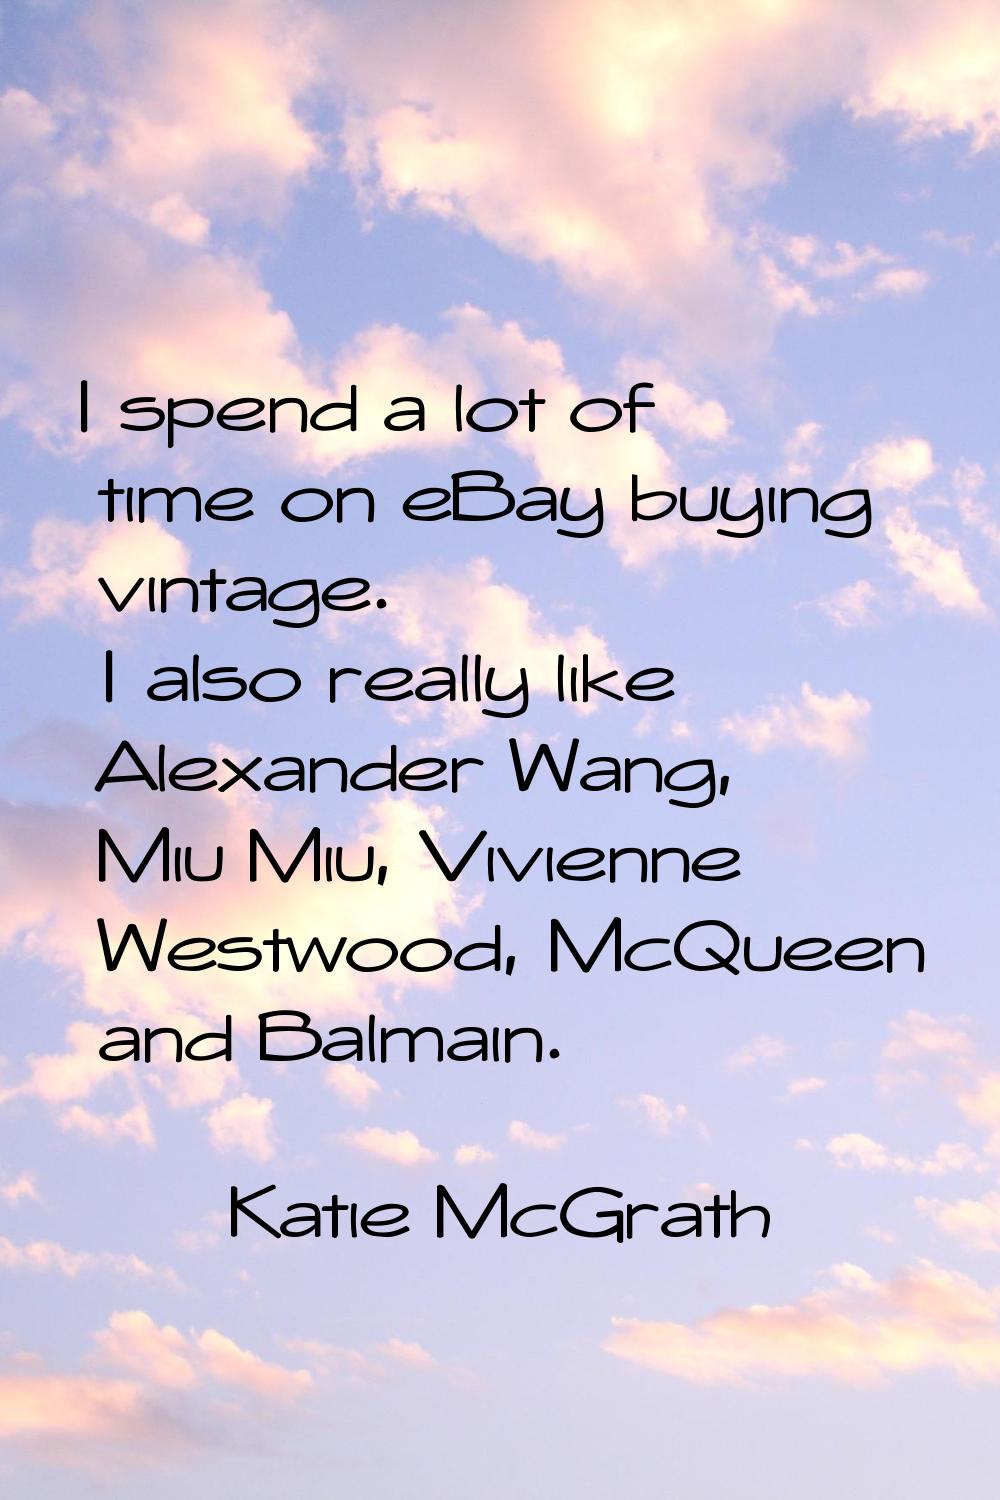 I spend a lot of time on eBay buying vintage. I also really like Alexander Wang, Miu Miu, Vivienne 